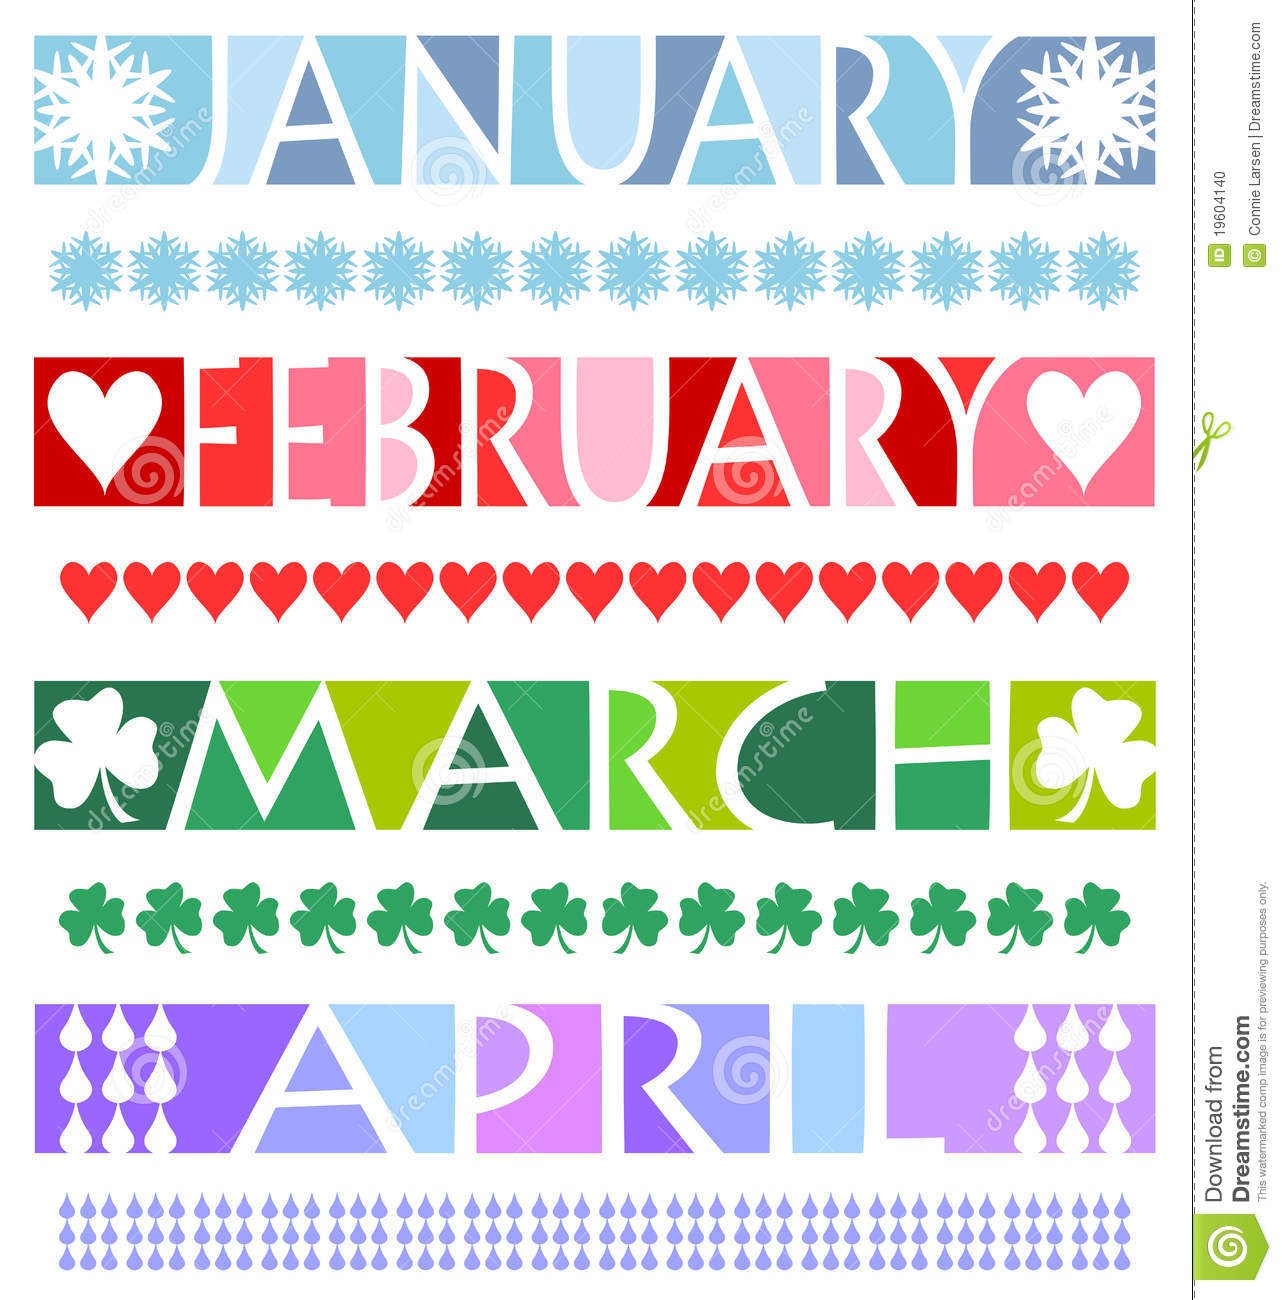 January clipart banner, January banner Transparent FREE for download on